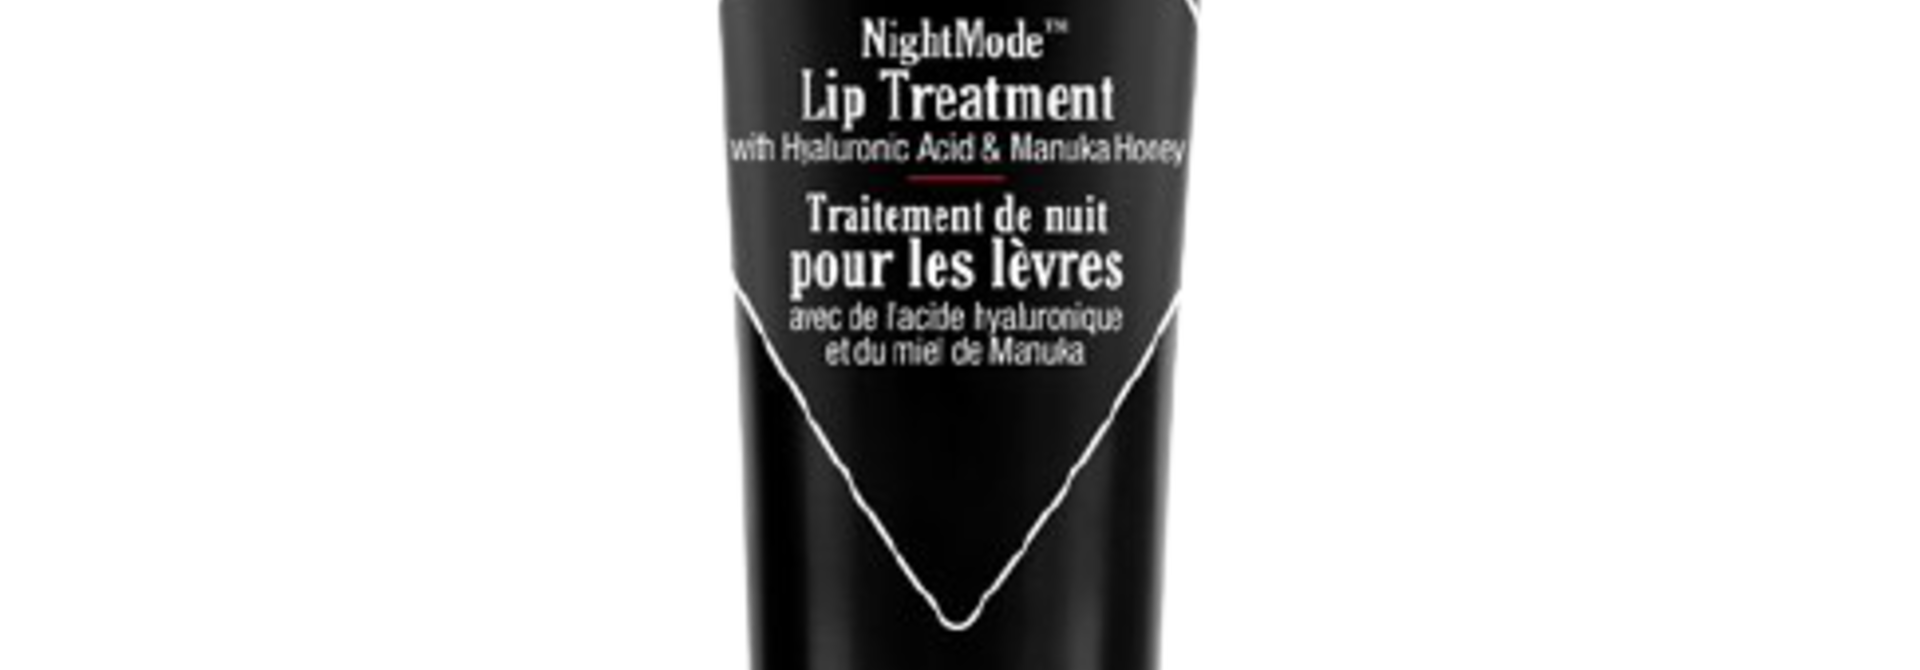 NightMode Lip Treatment | The Skincare Collection - .25 oz